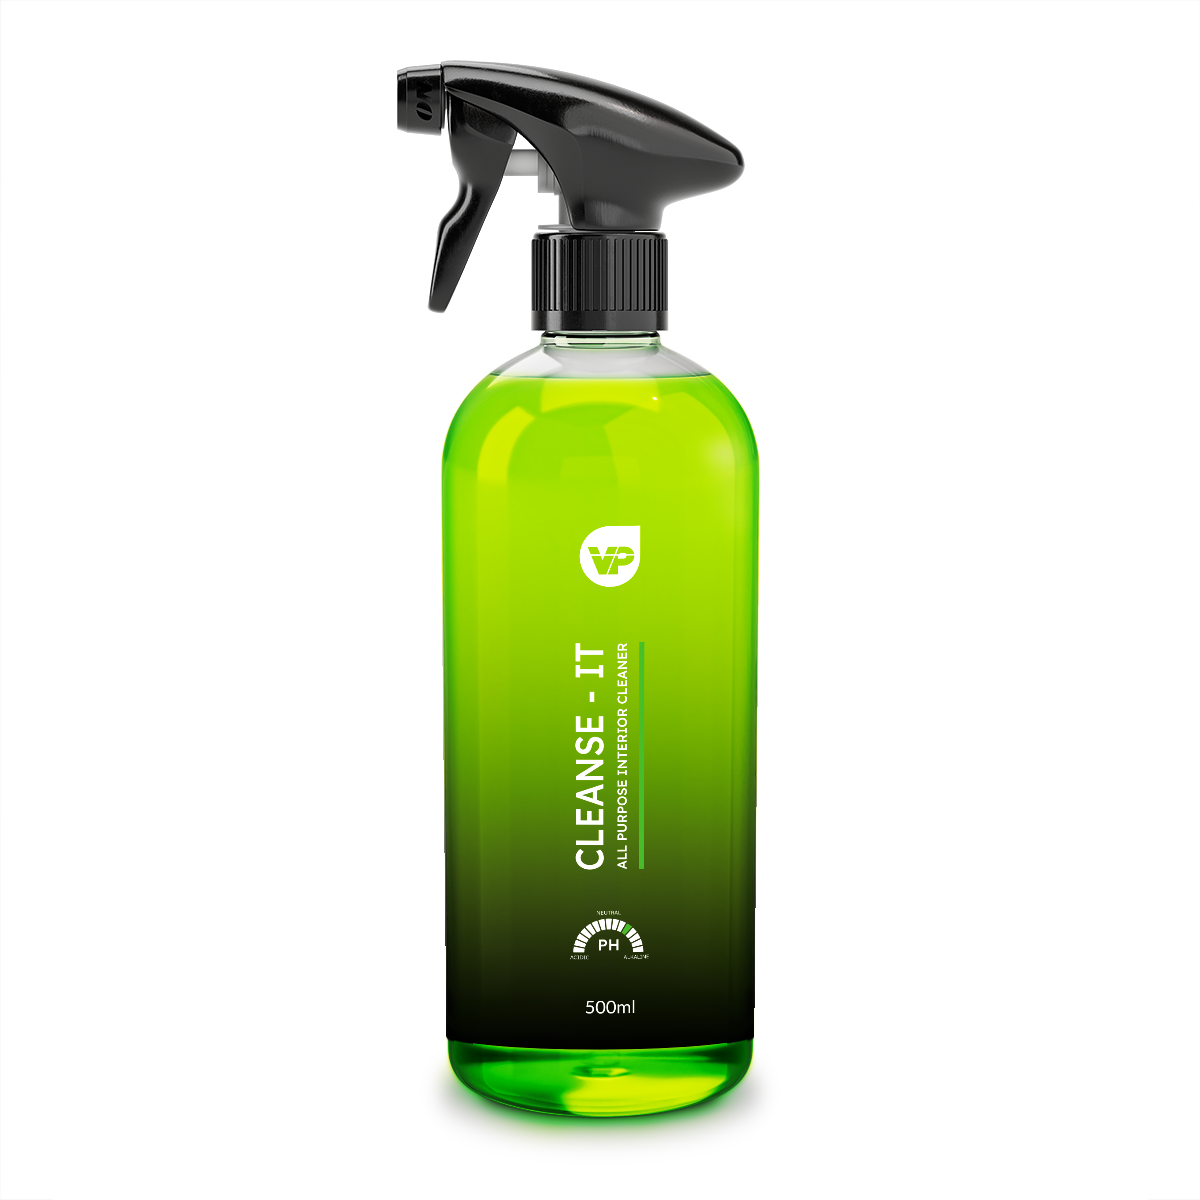 Cleanse-It-all-purpose-interior-car-cleaner-500ml-VP.png